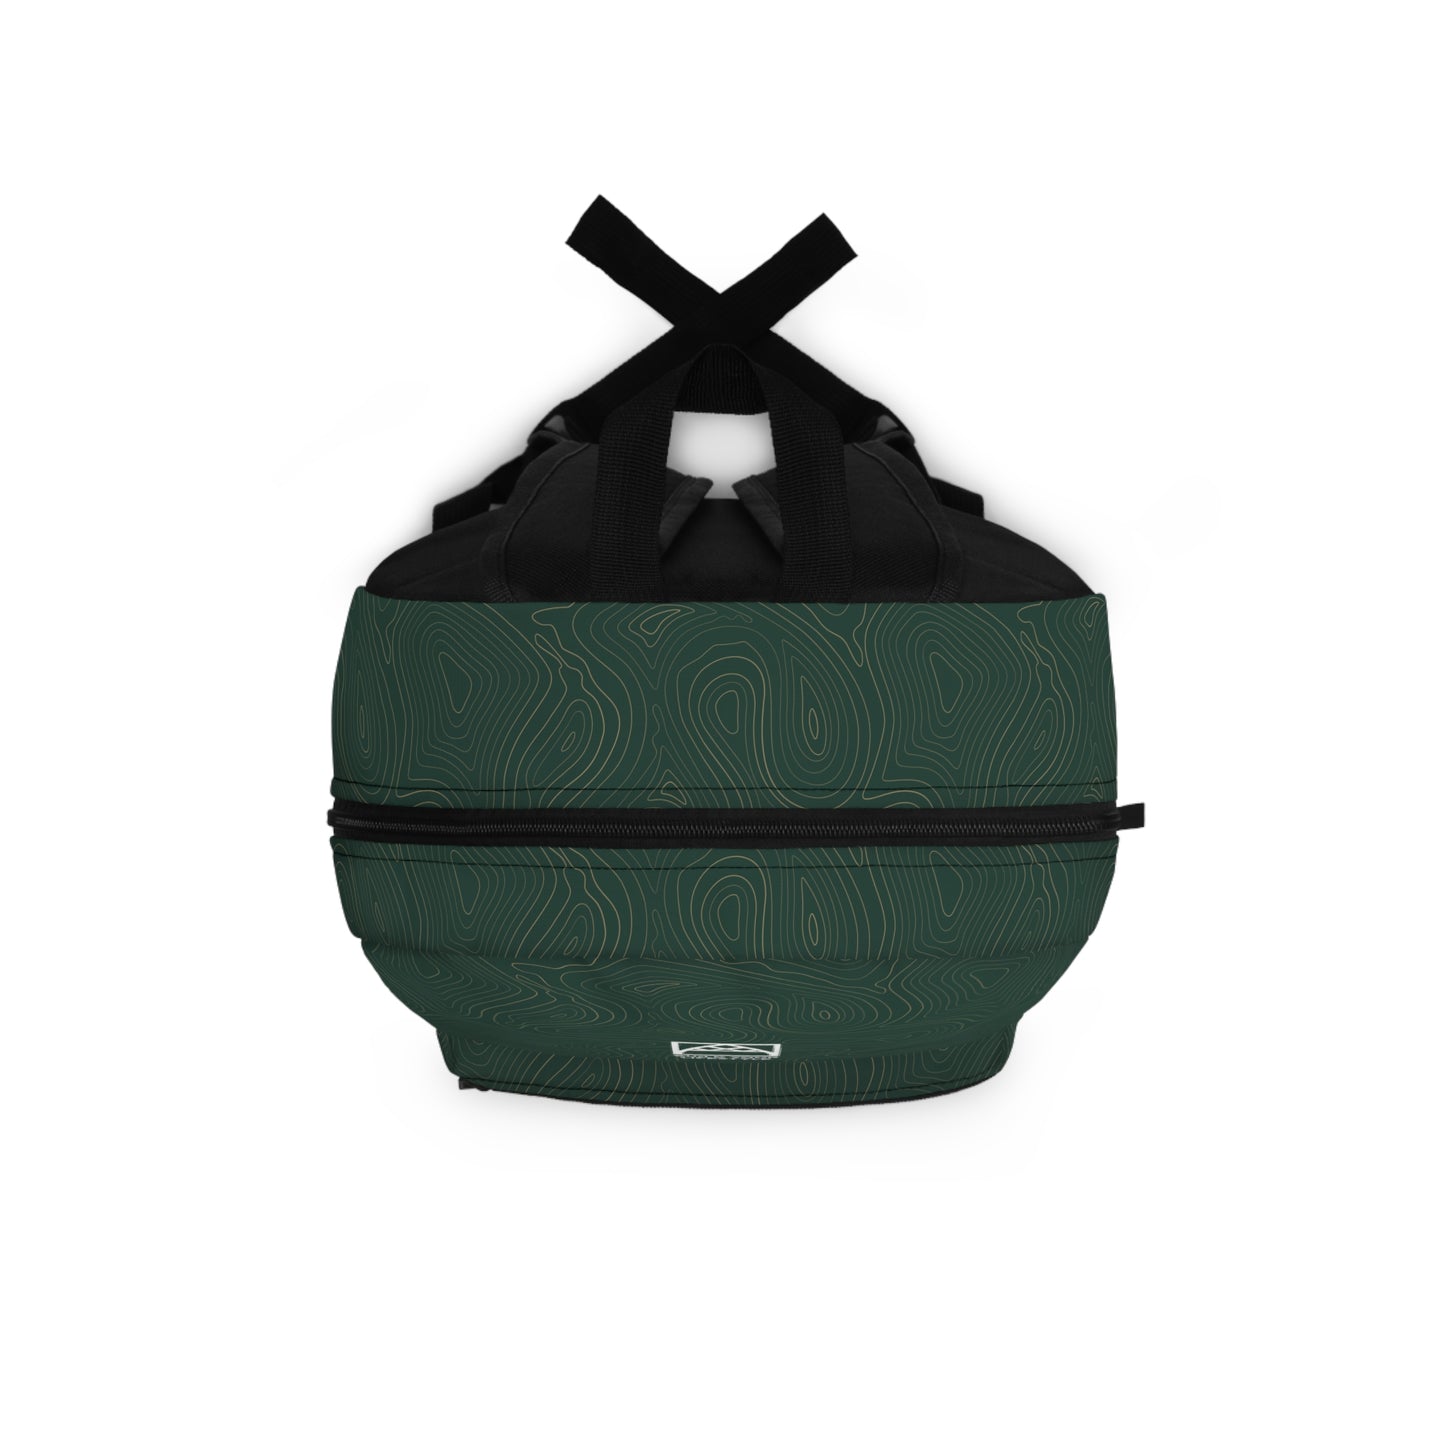 Arched Cabins LLC TopoLogo Backpack